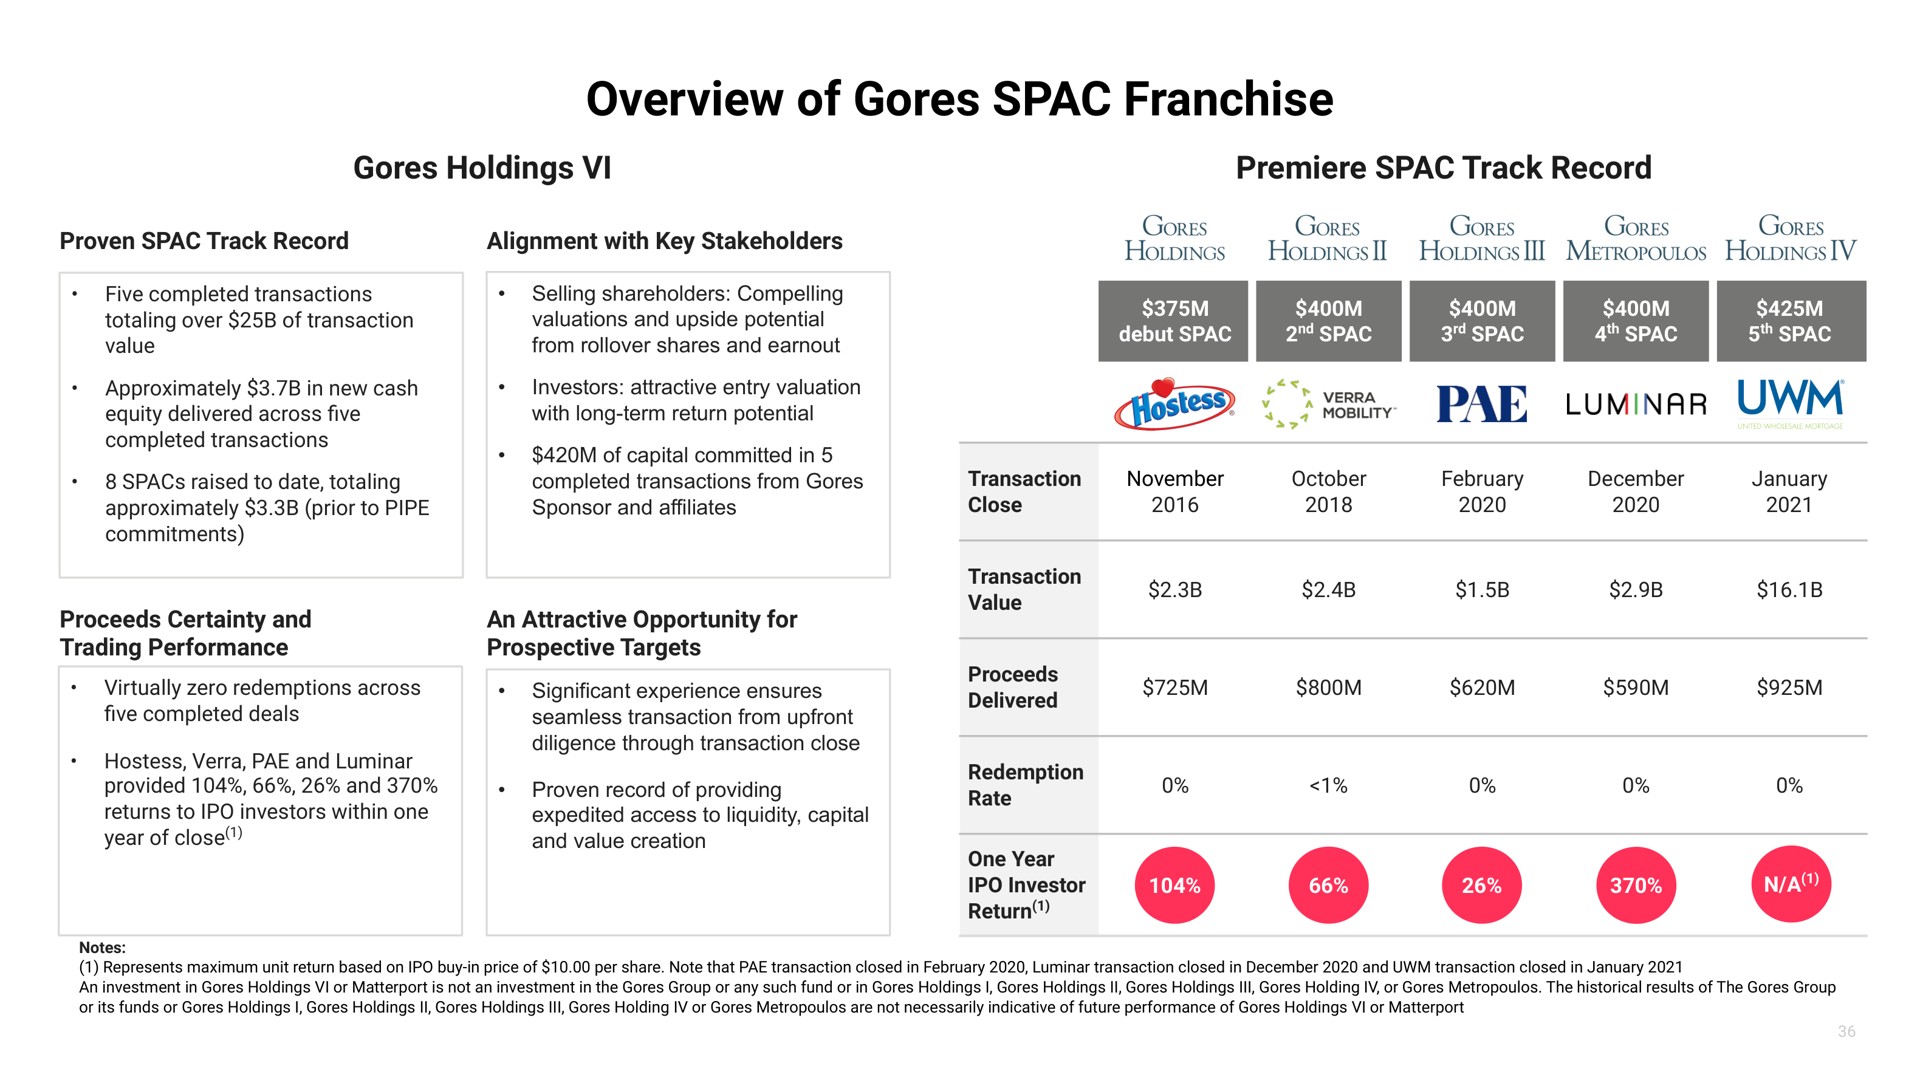 overview of gores franchise gores holdings premiere track record | Matterport